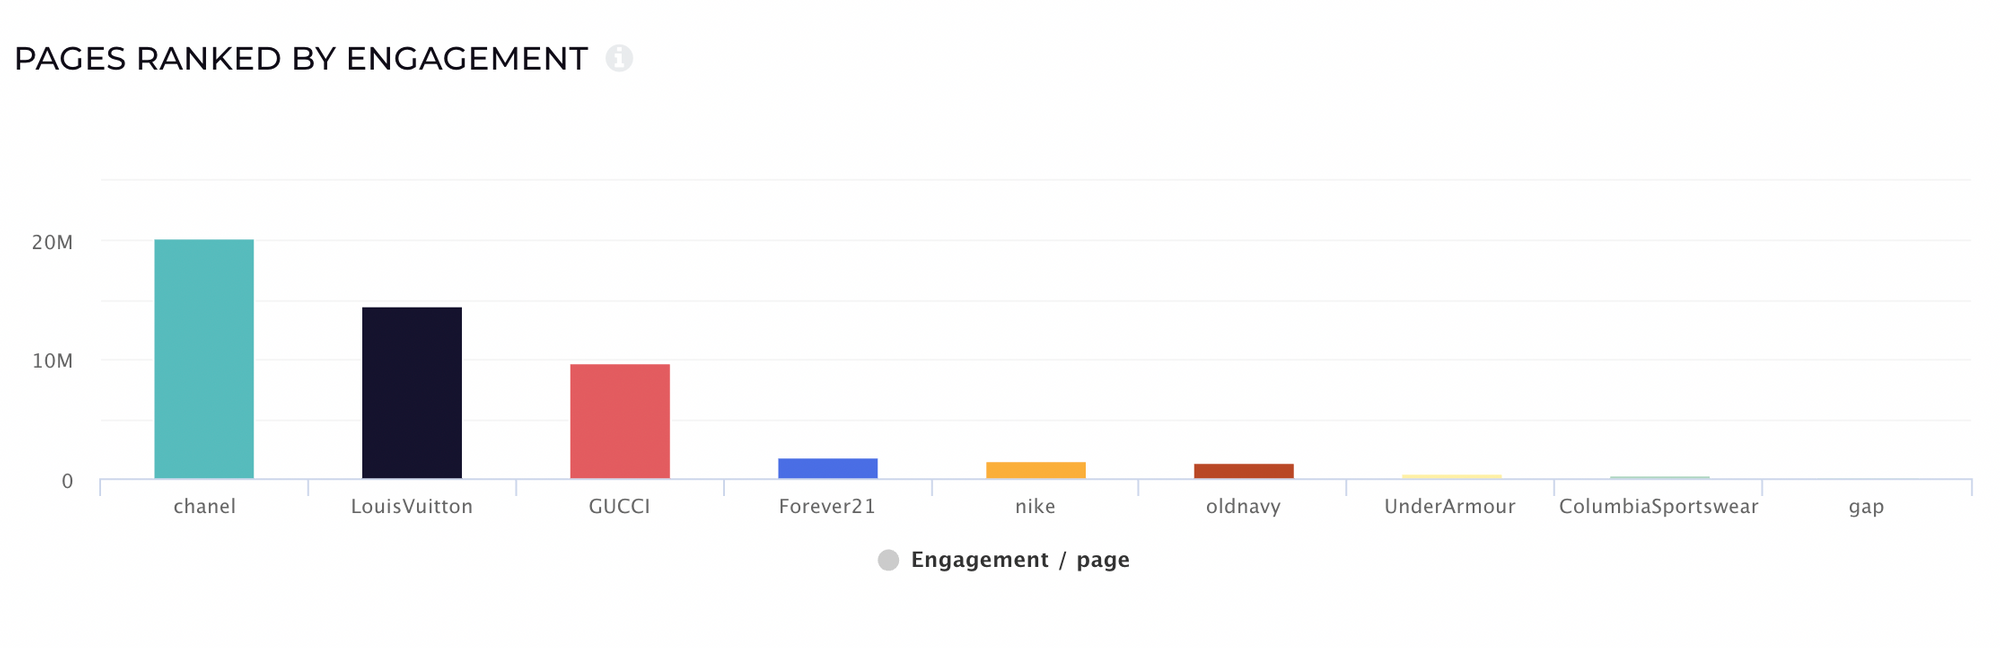 This image presents the engagement level on Facebook of luxury brands from the fashion segment.